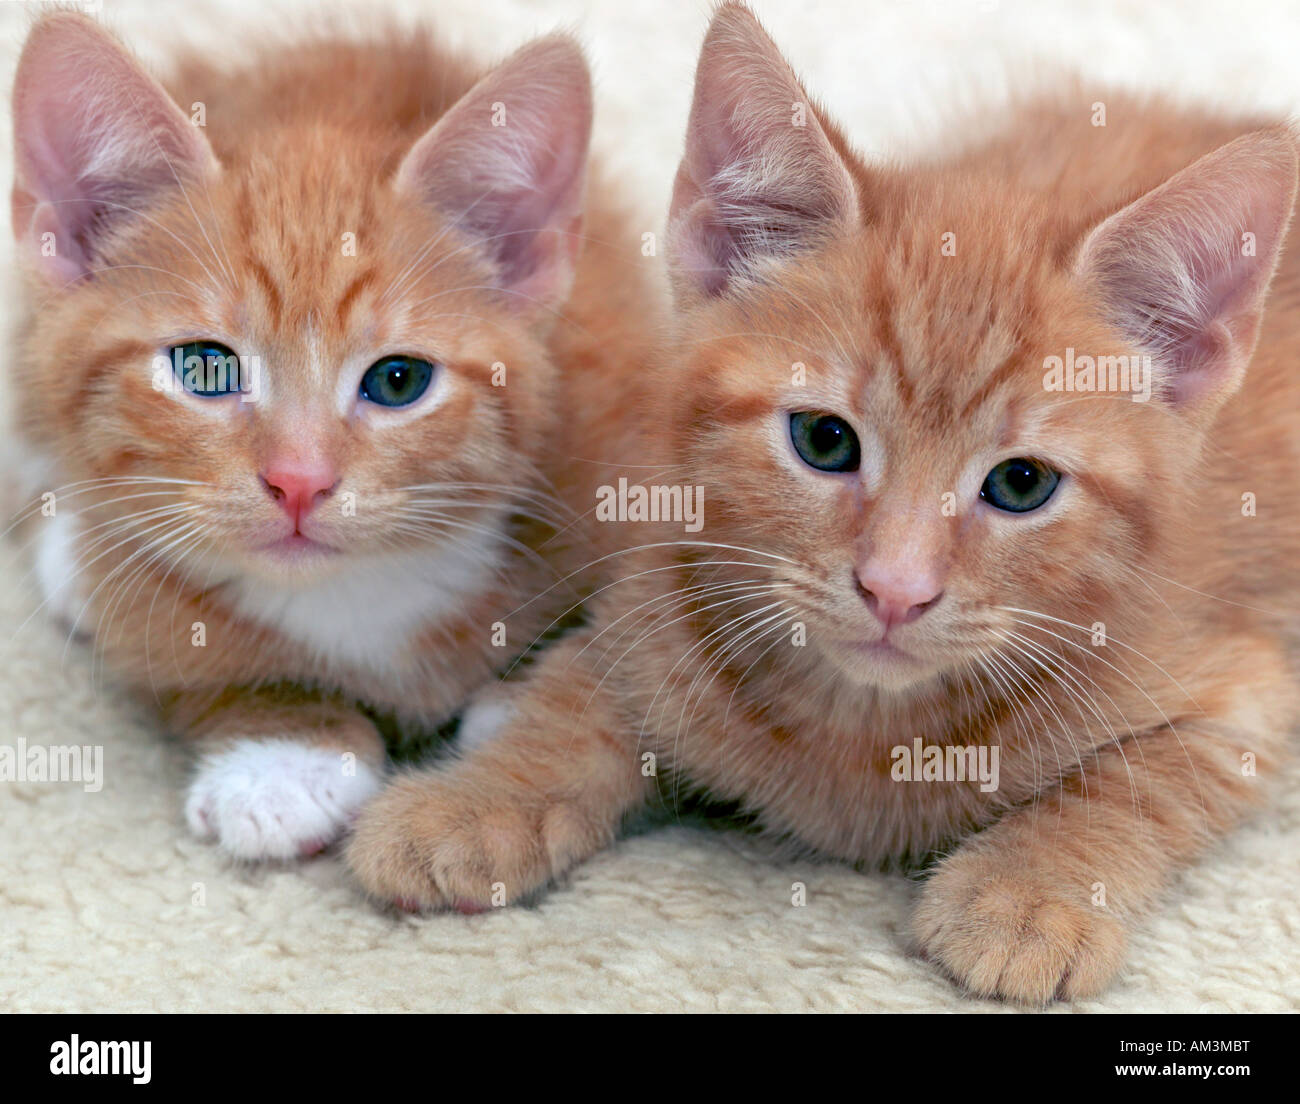 Two Ginger Tom Kittens Six Weeks Old Stock Photo